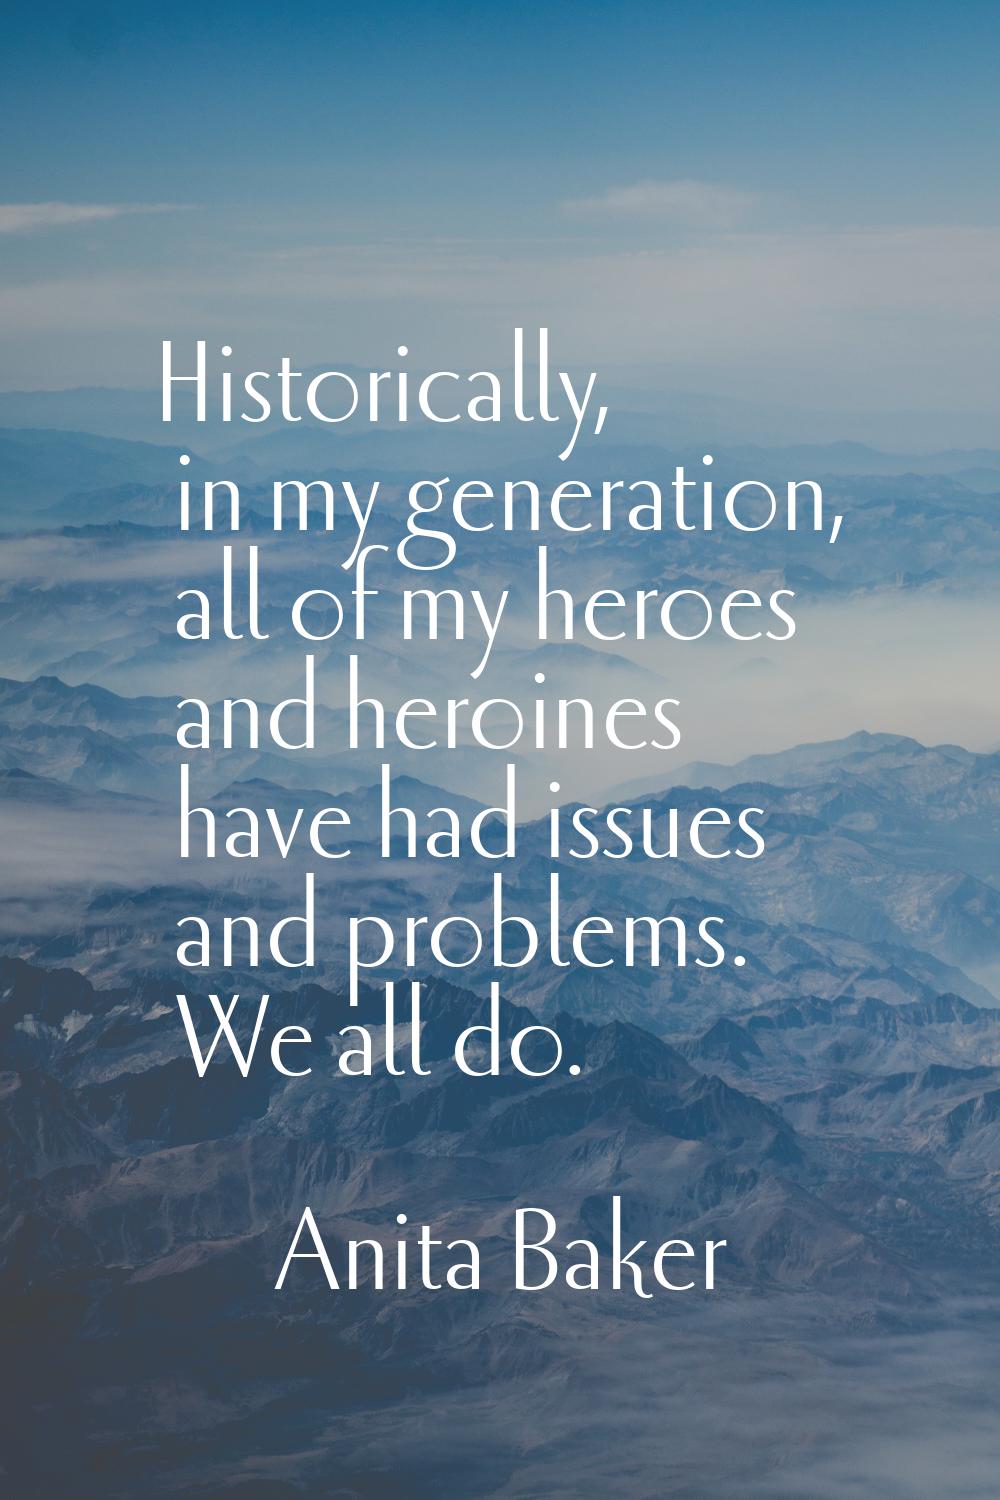 Historically, in my generation, all of my heroes and heroines have had issues and problems. We all 